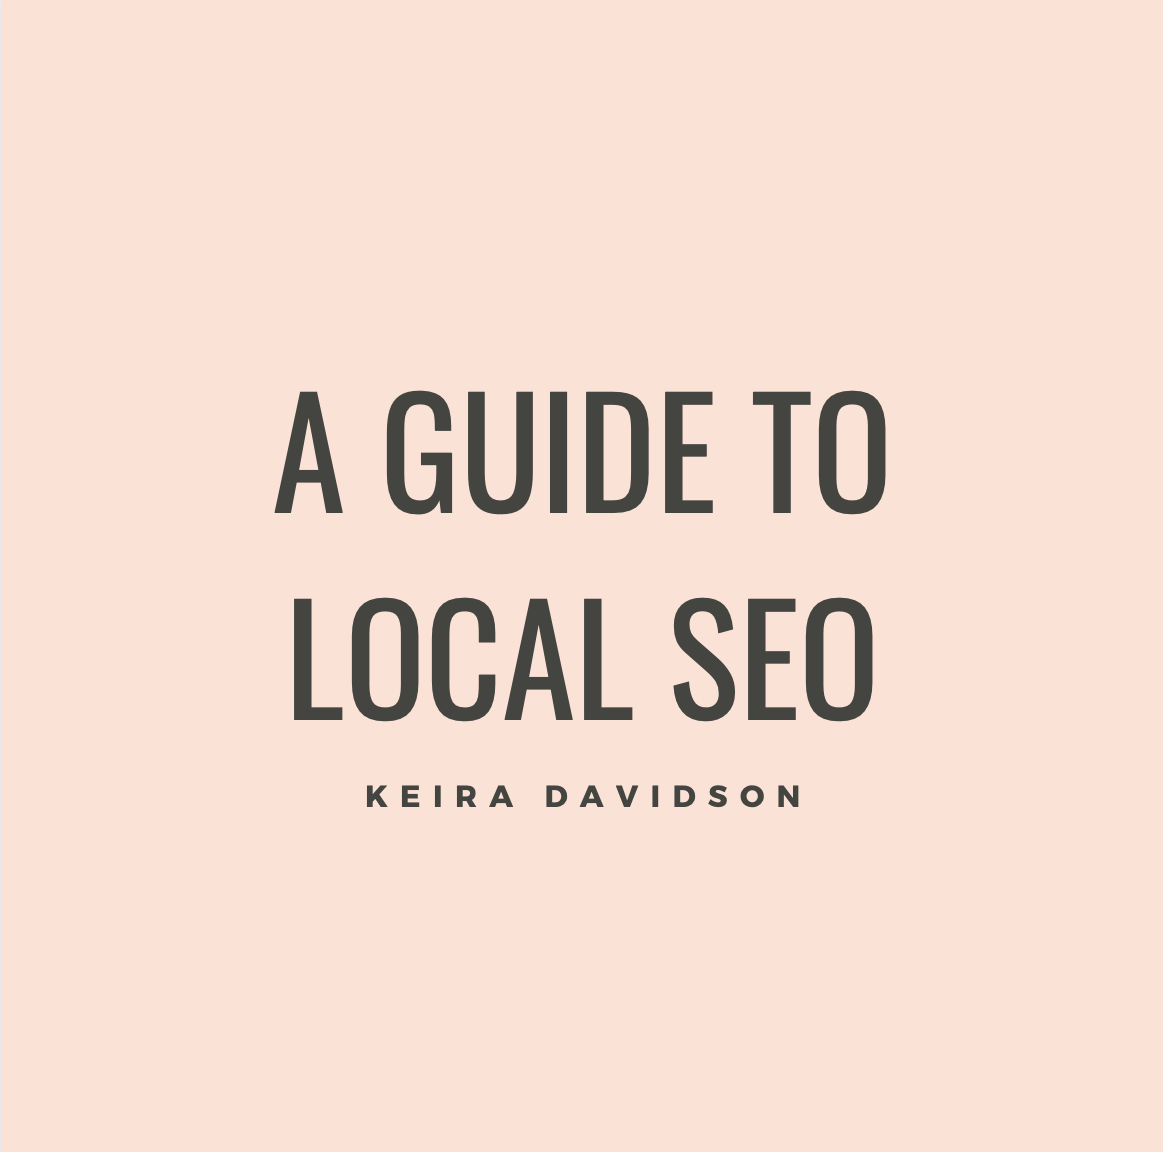 Local SEO: The Complete Guide for 2020